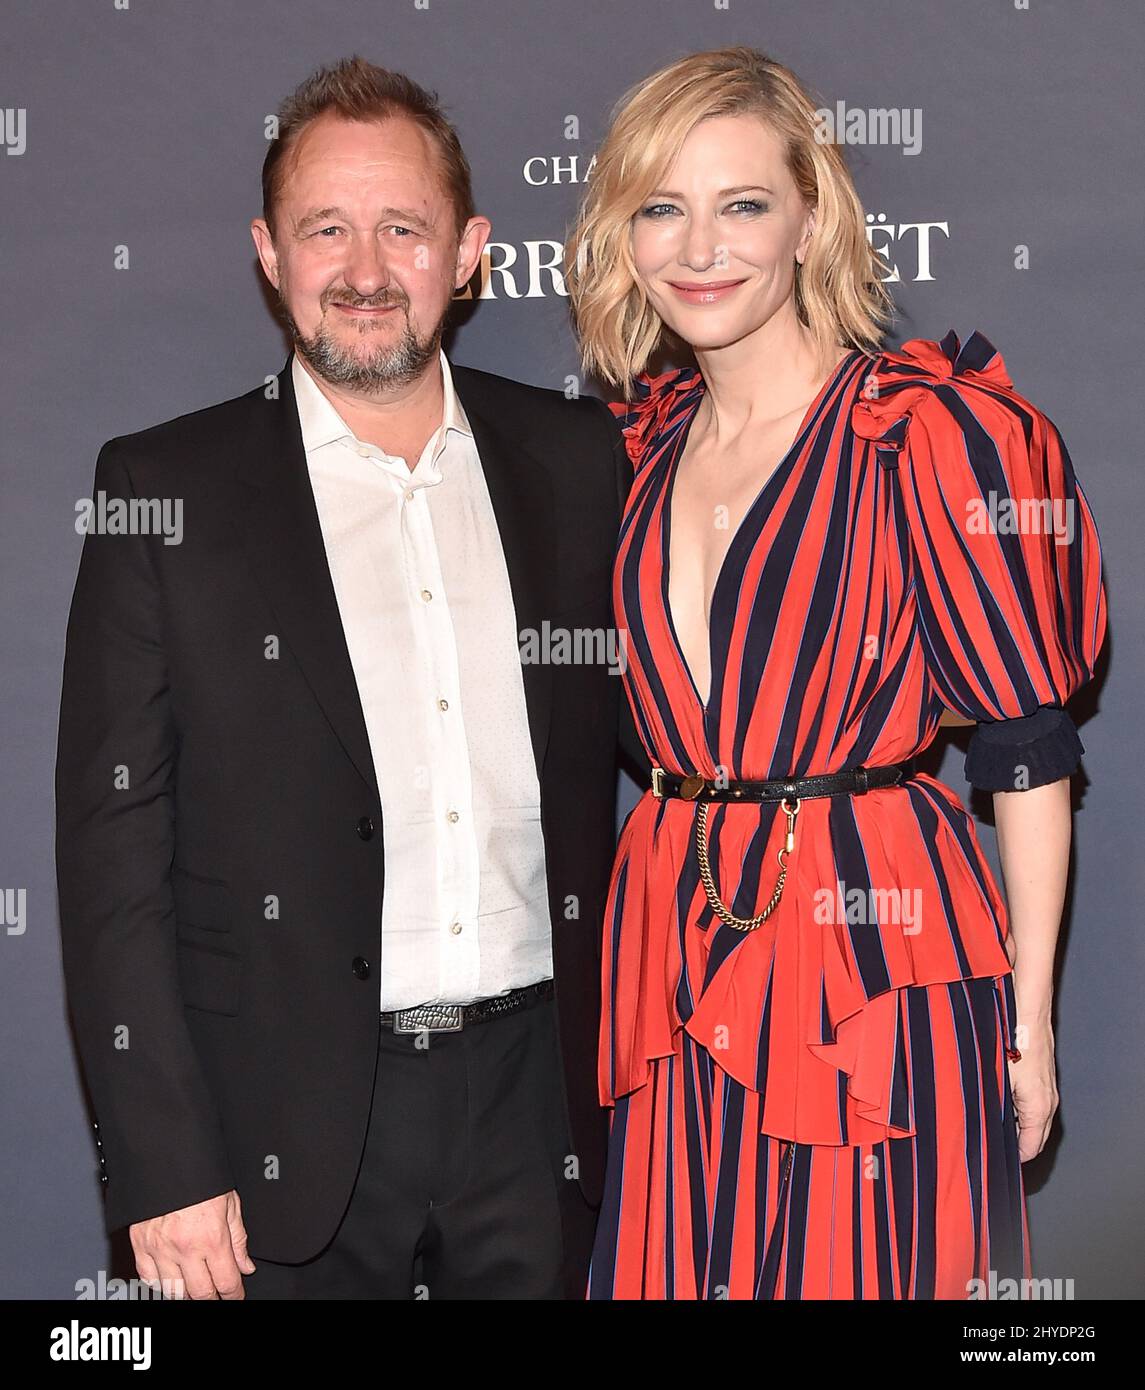 Cate Blanchett and Andrew Upton arriving for the third annual InStyle Awards, honoring actors, actresses and artists whose style defines the red carpet, as well as the industry's top image makers held at The Getty Center, Los Angeles Stock Photo